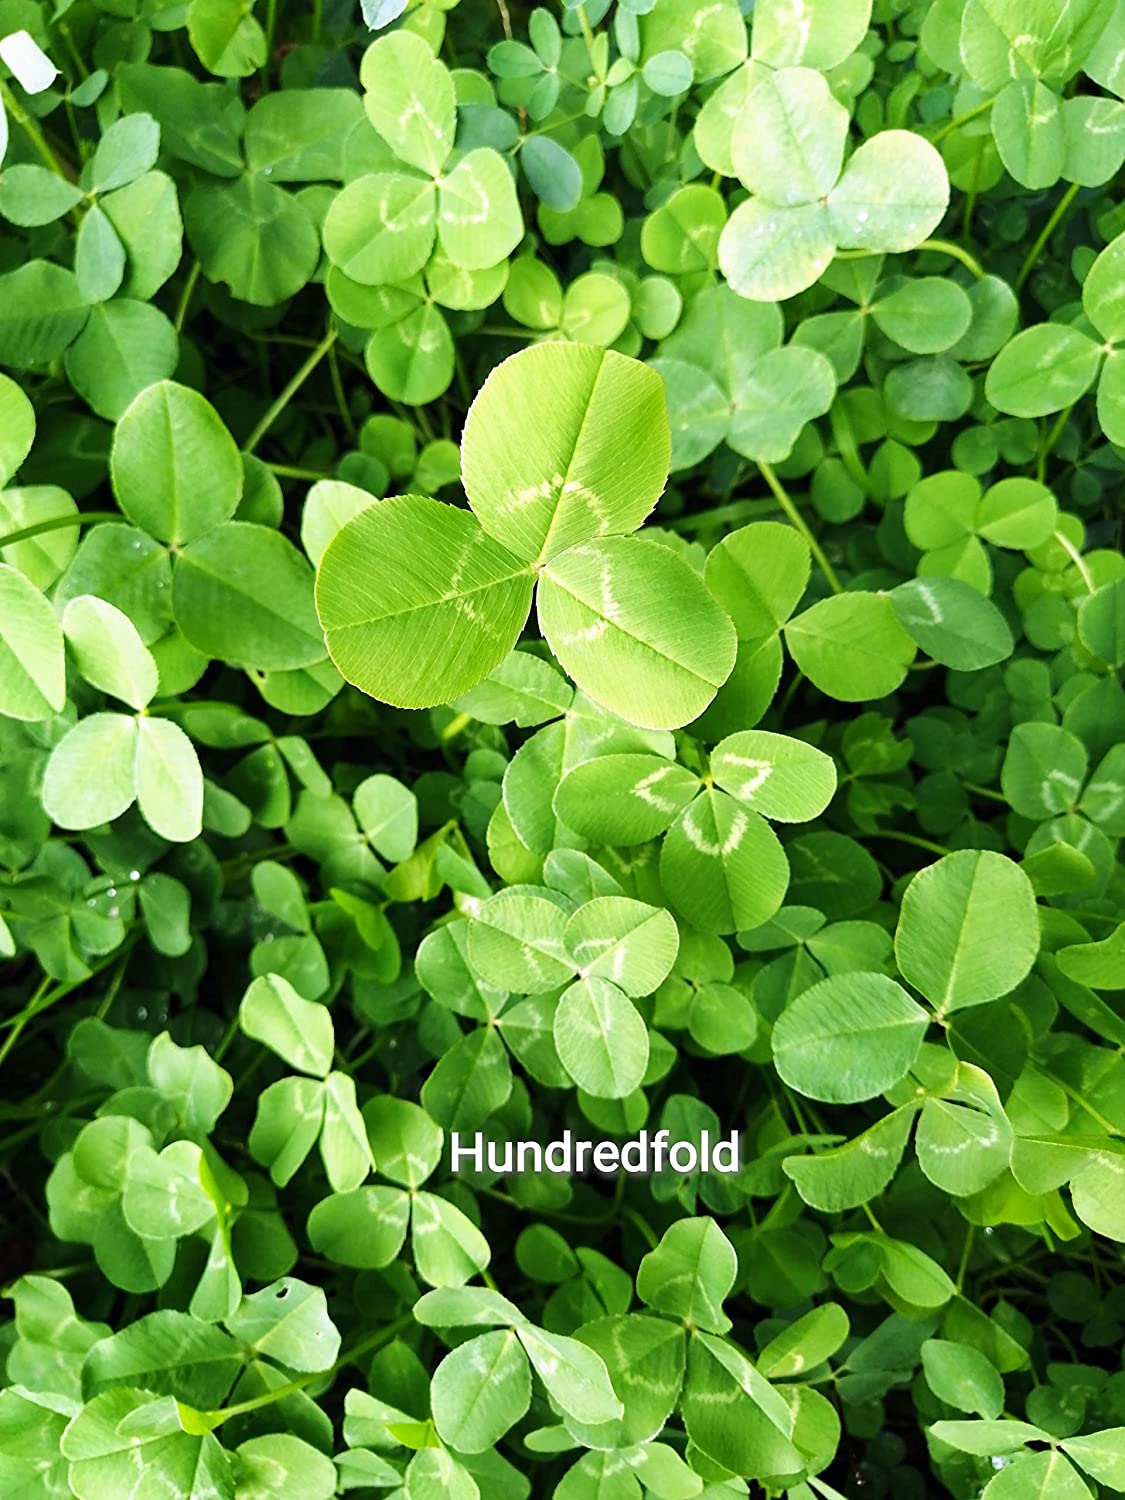 Hundredfold Micro White Clover 2 LBS Seeds - Perennial Legume Microclover Excellent for Enriching Lawn, Ground Cover or Lawn Alternative